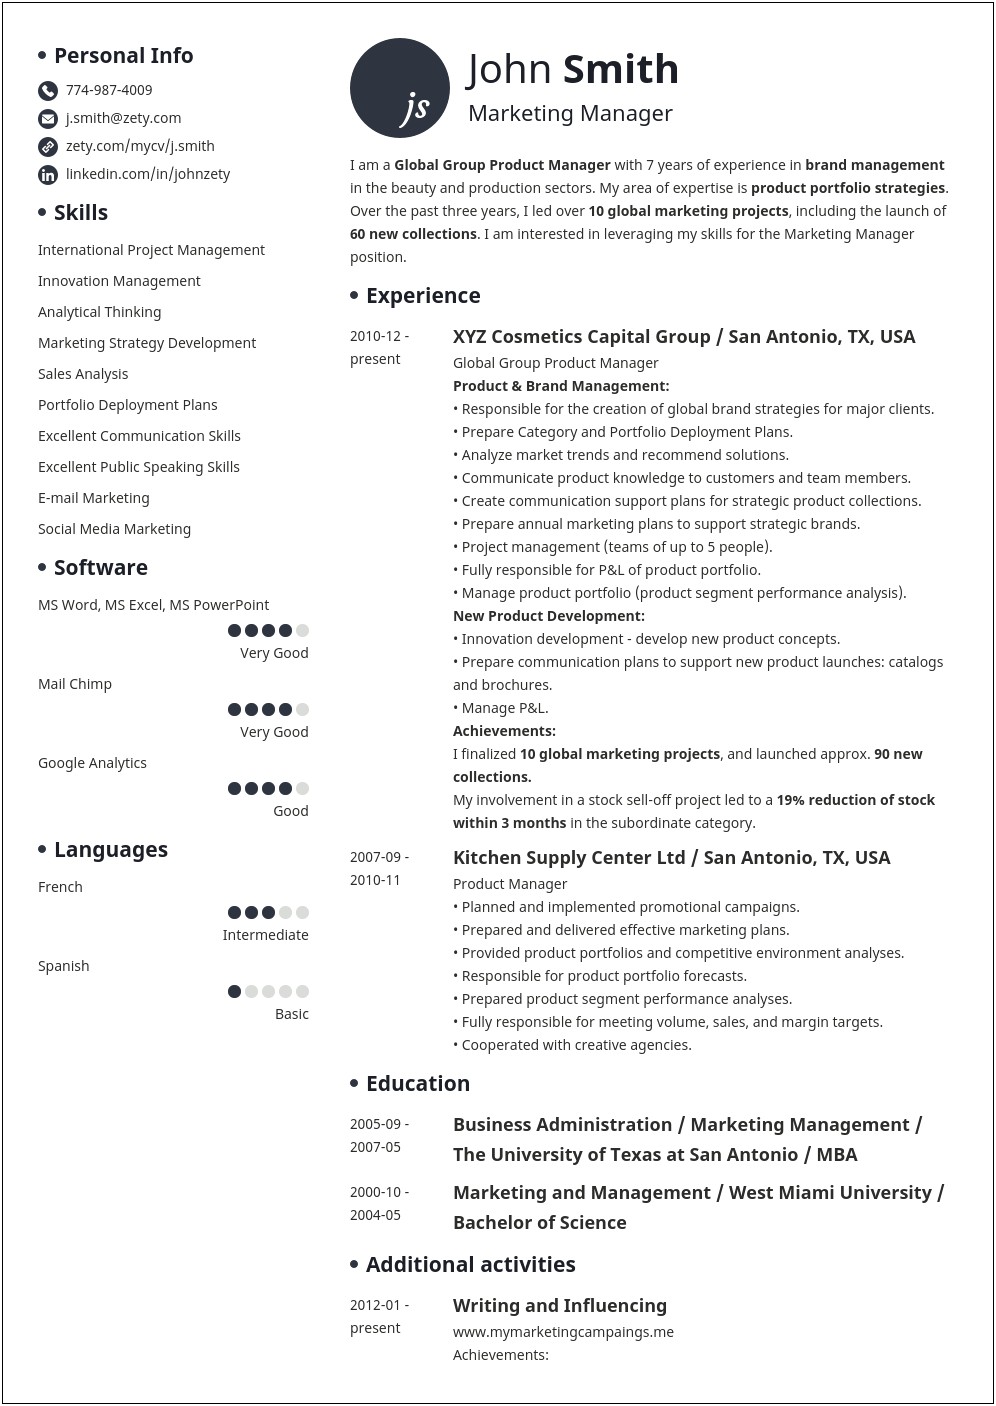 Best Way To Display Education On Resume